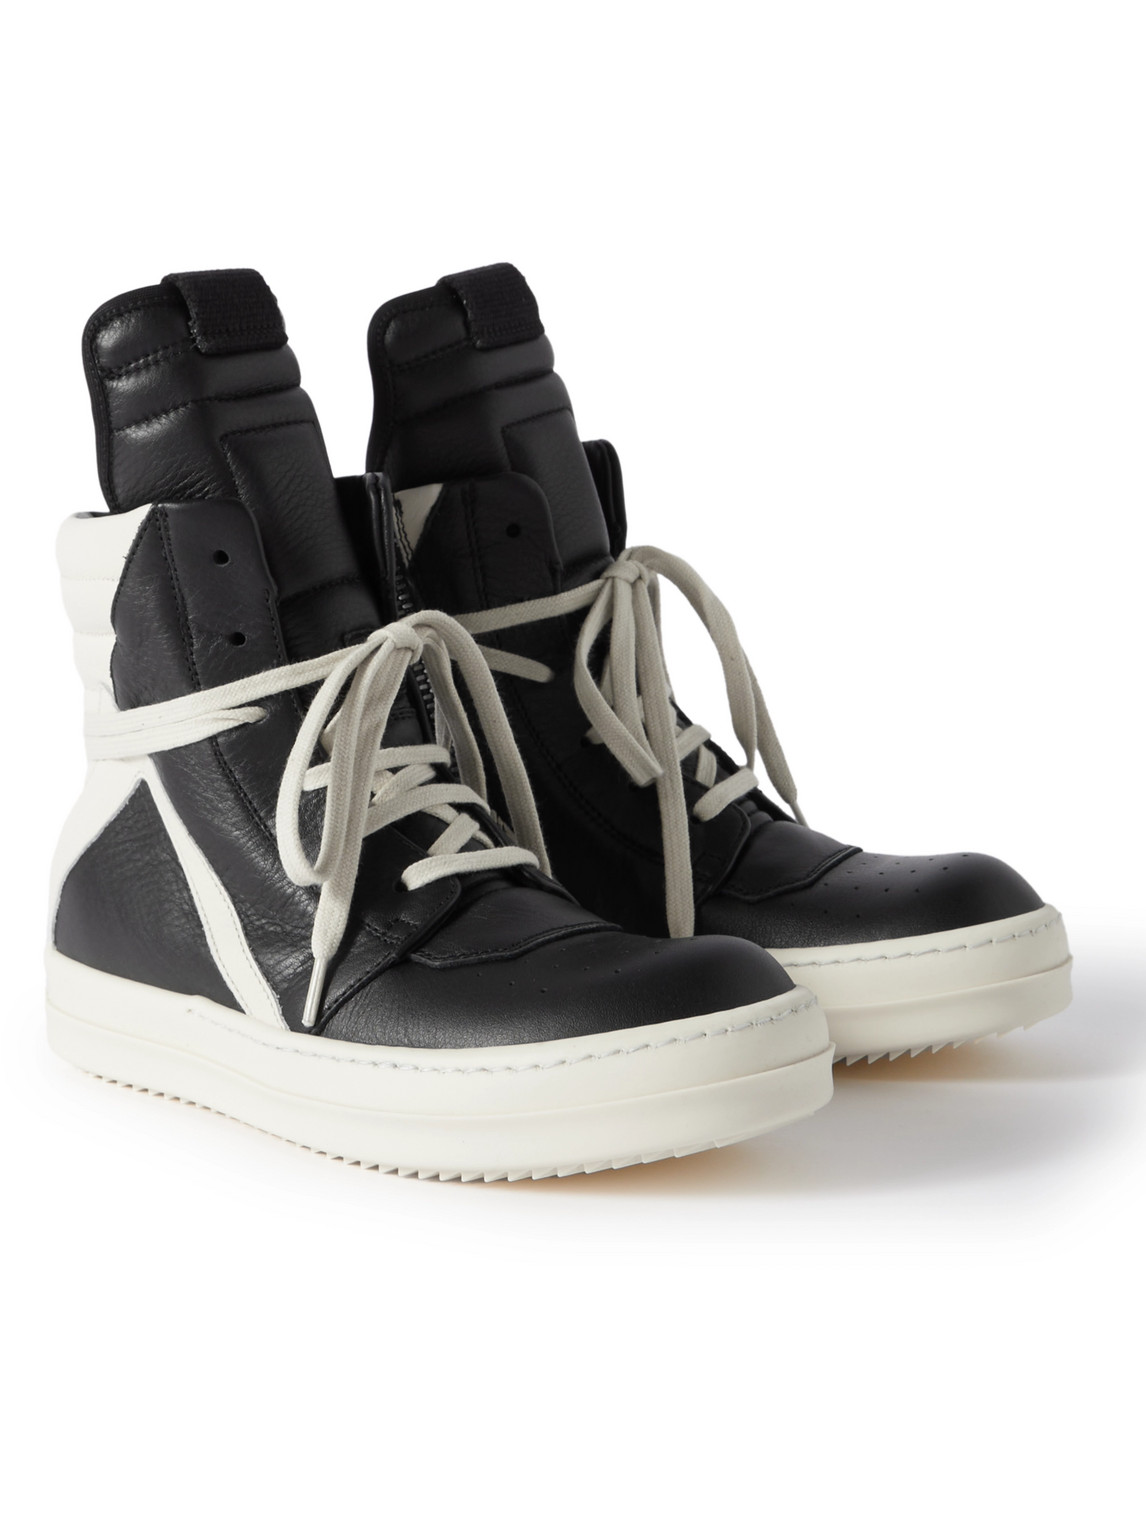 Rick Owens Geobasket Two-tone Leather High-top Sneakers In Black